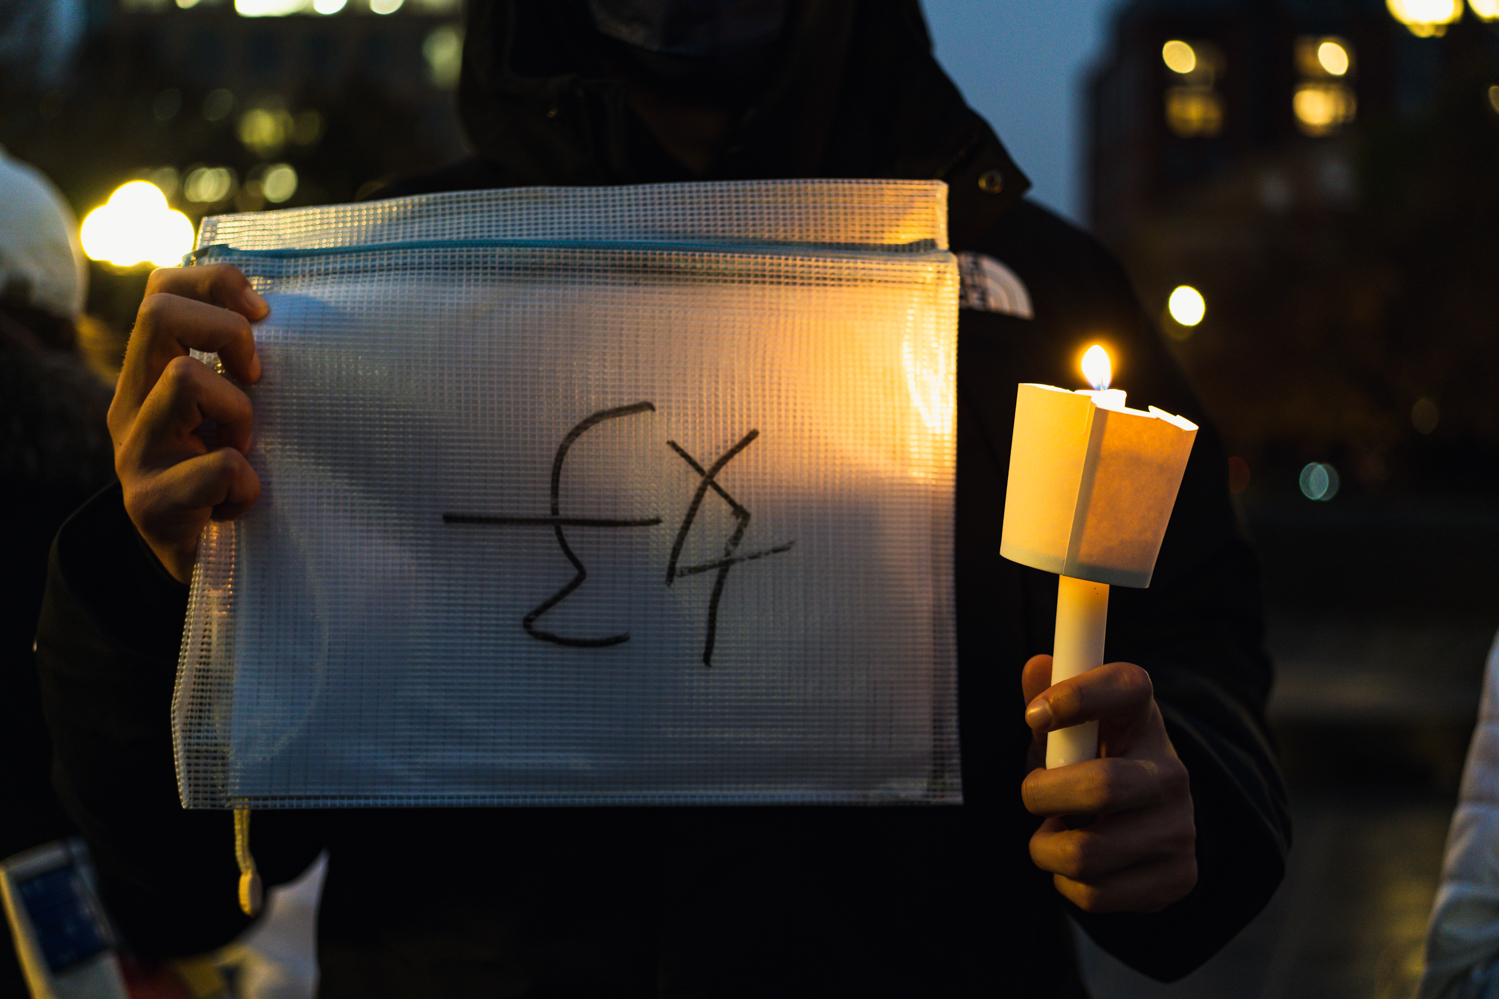 A person wearing black holding a torch in one hand and a plastic bag with the Chinese character for “good” written on it upside down.